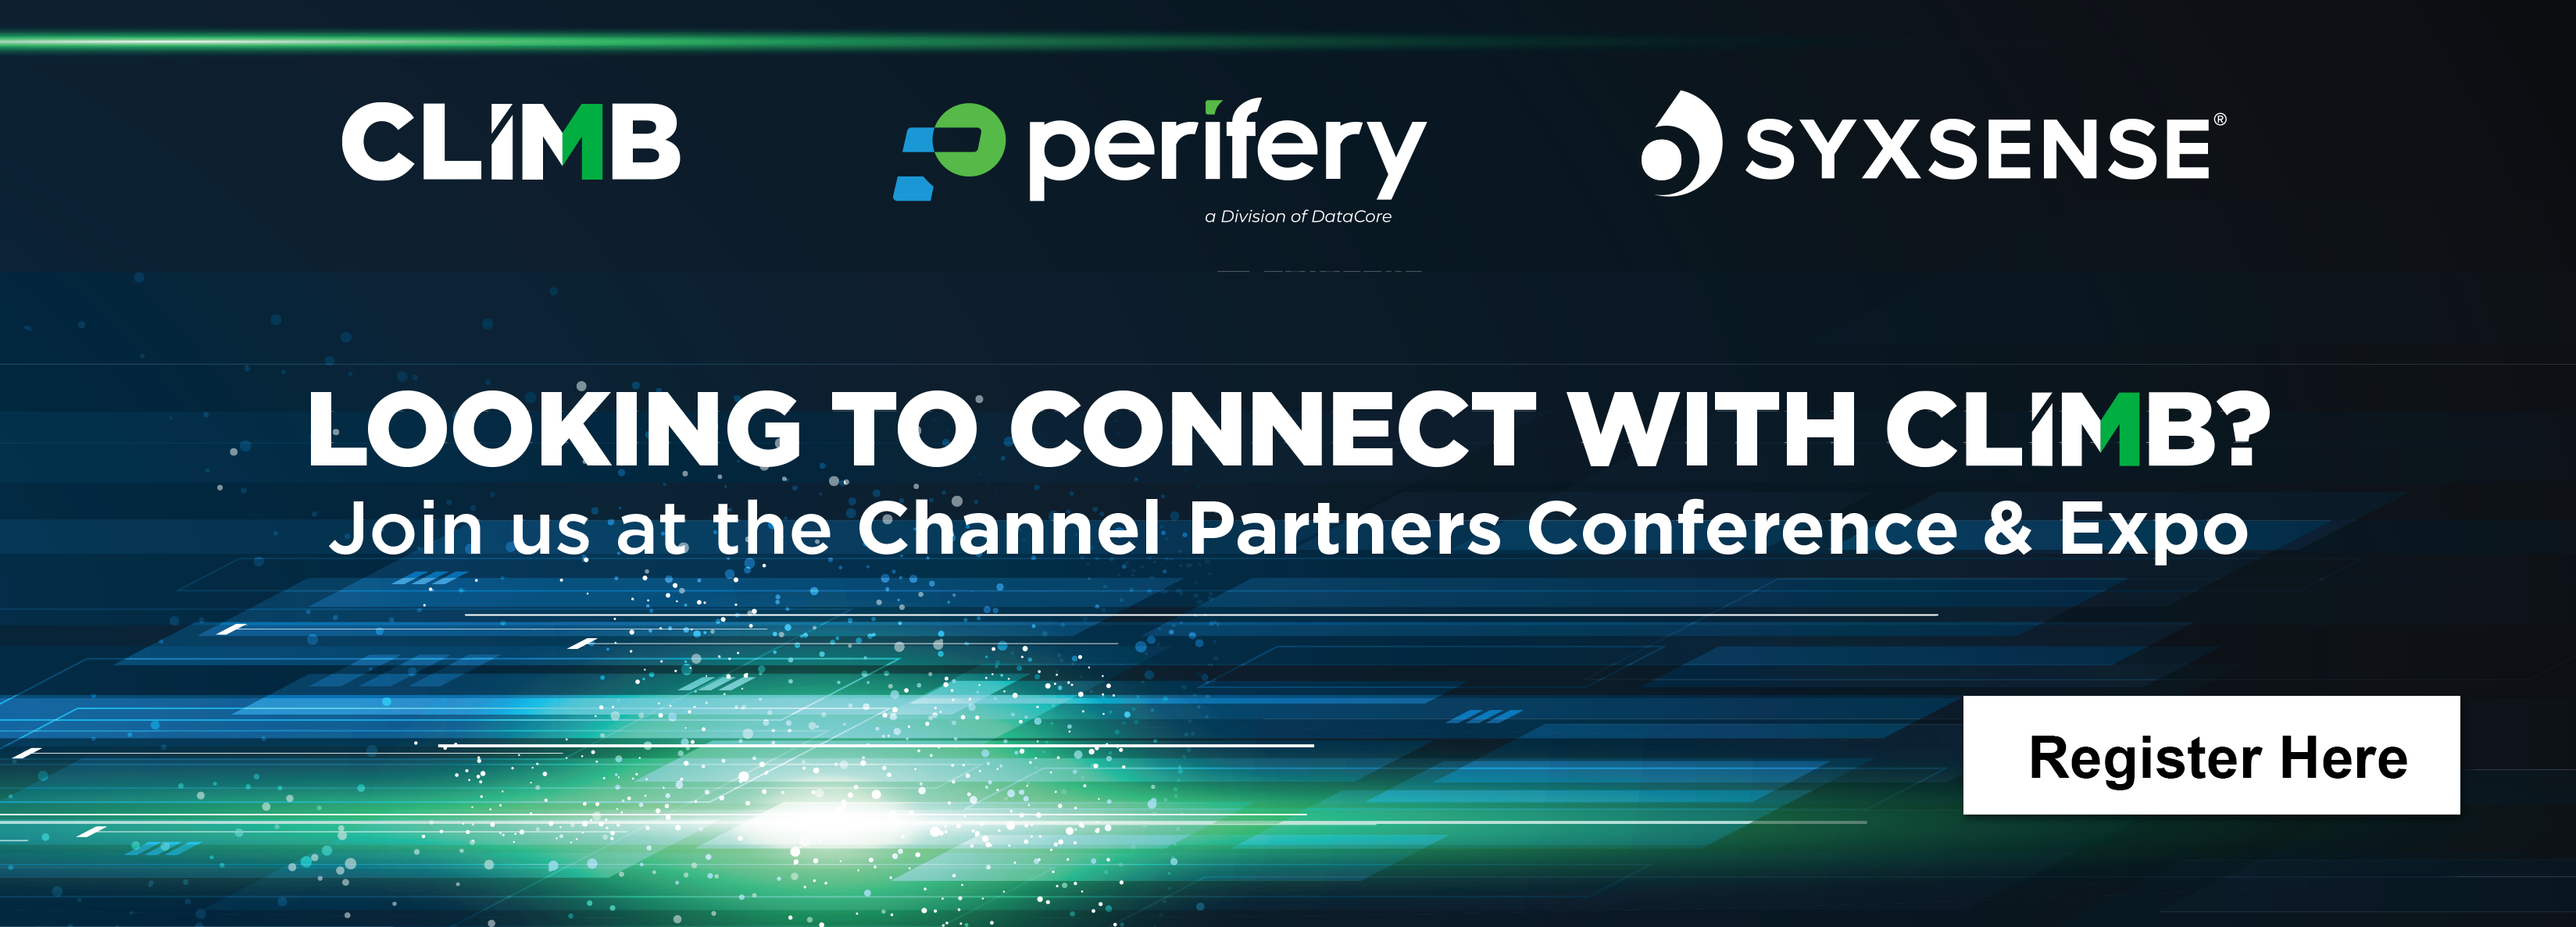 Looking to connect with Climb? Join us at the Channel Partners Conference & Expo